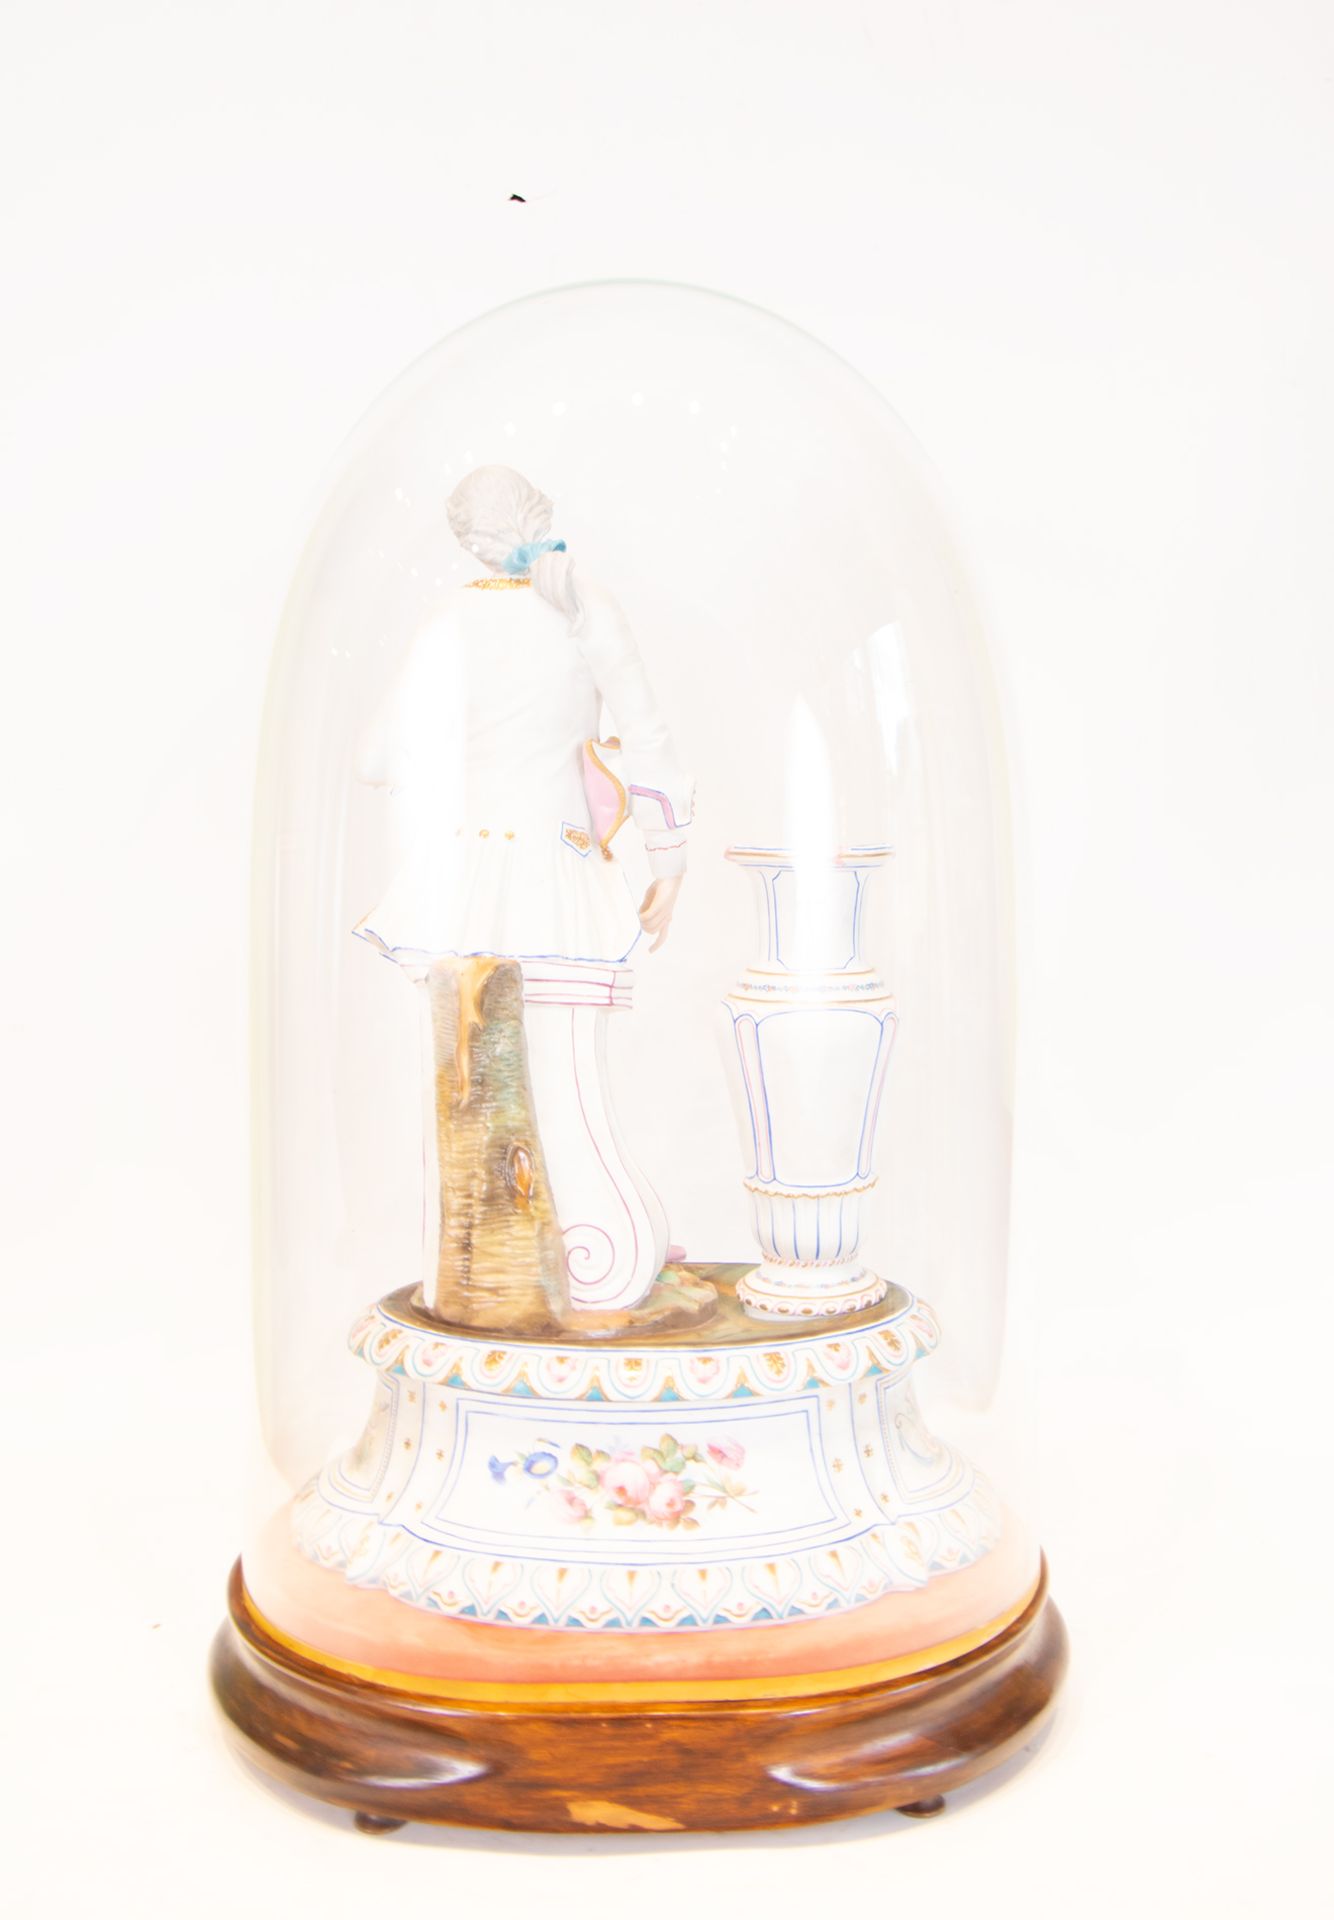 Large Pair of Figures in German Biscuit Porcelain with Crystal lanterns, German school of the 19th c - Image 5 of 9